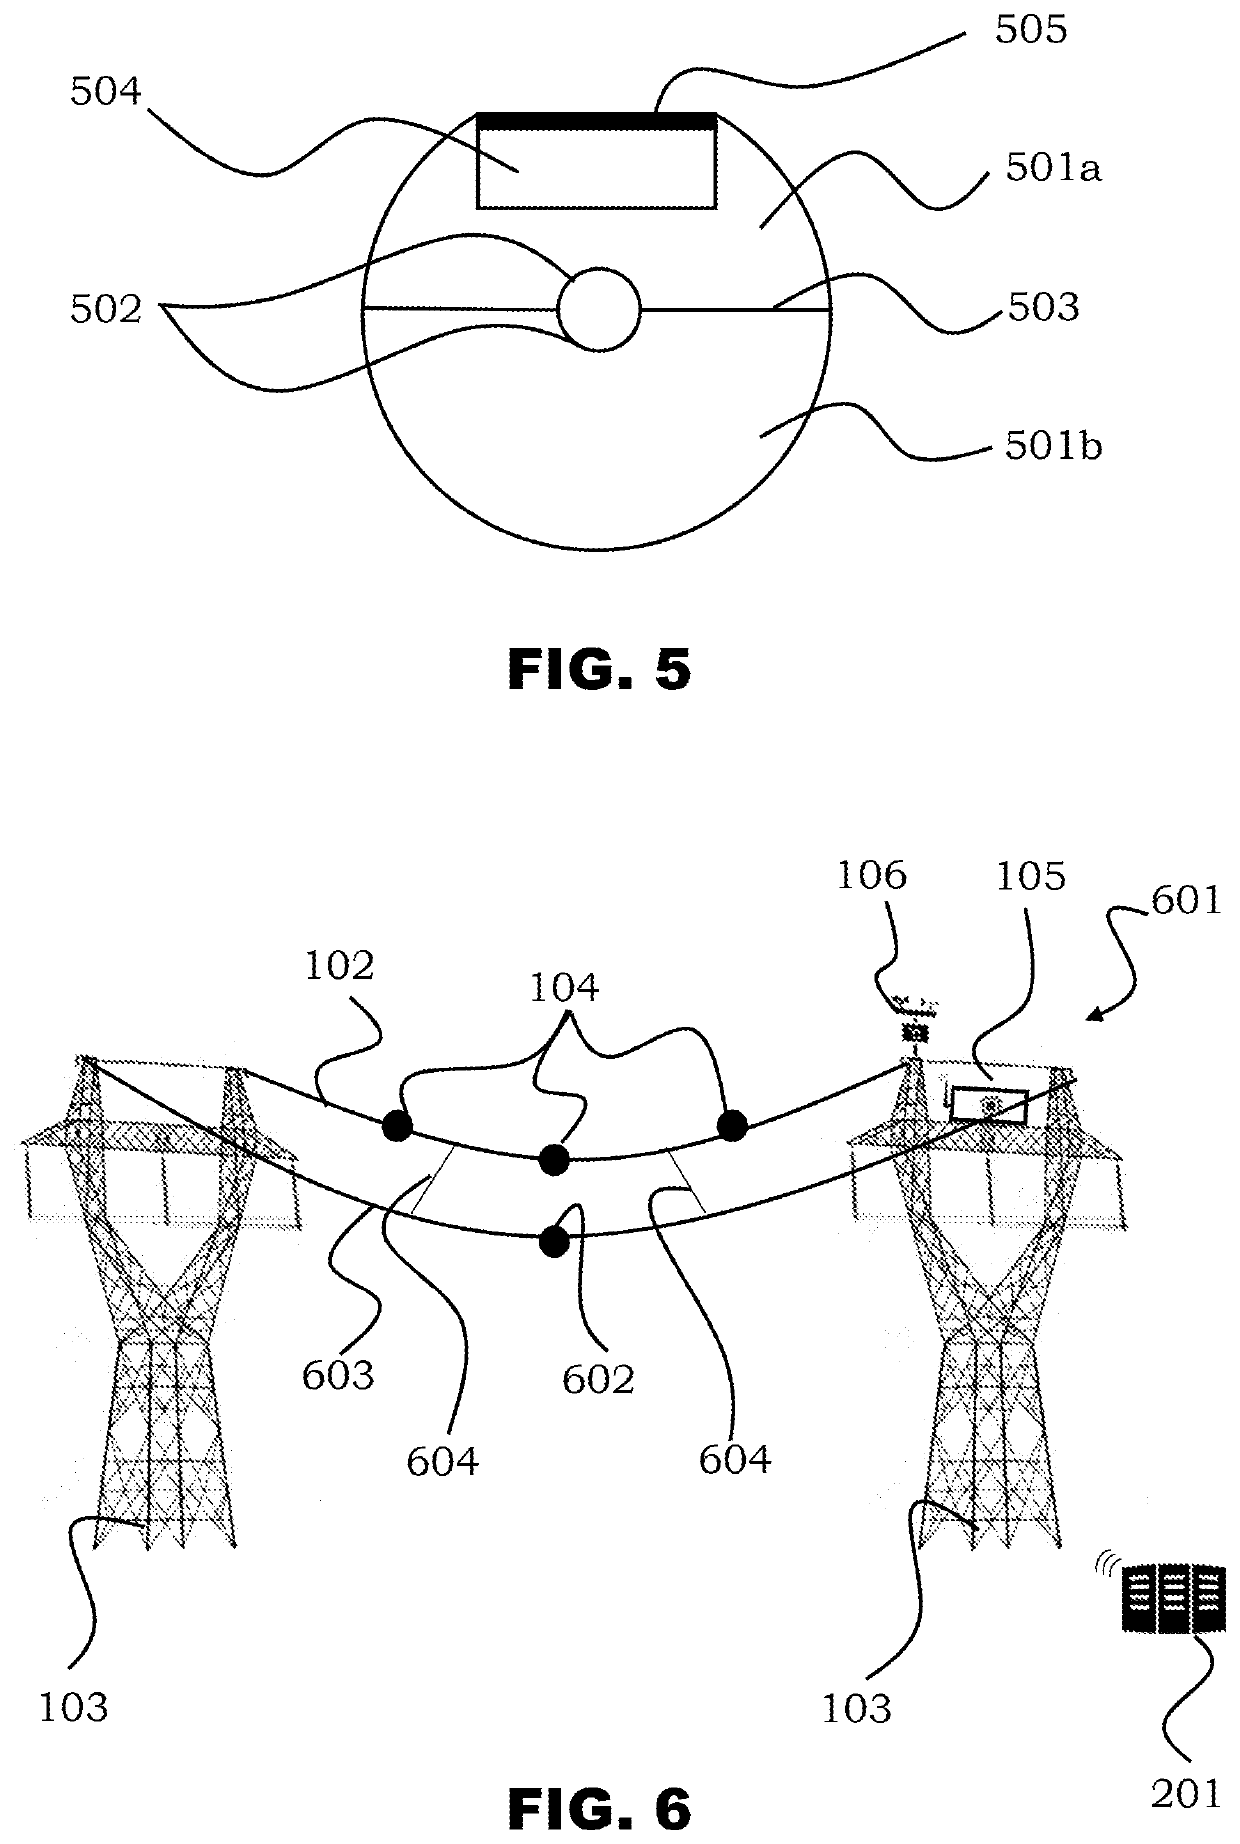 Monitoring system of wind-induced motion or vibration in at least one overhead cable, in particular a conductor aerial cable of a transmission or distribution